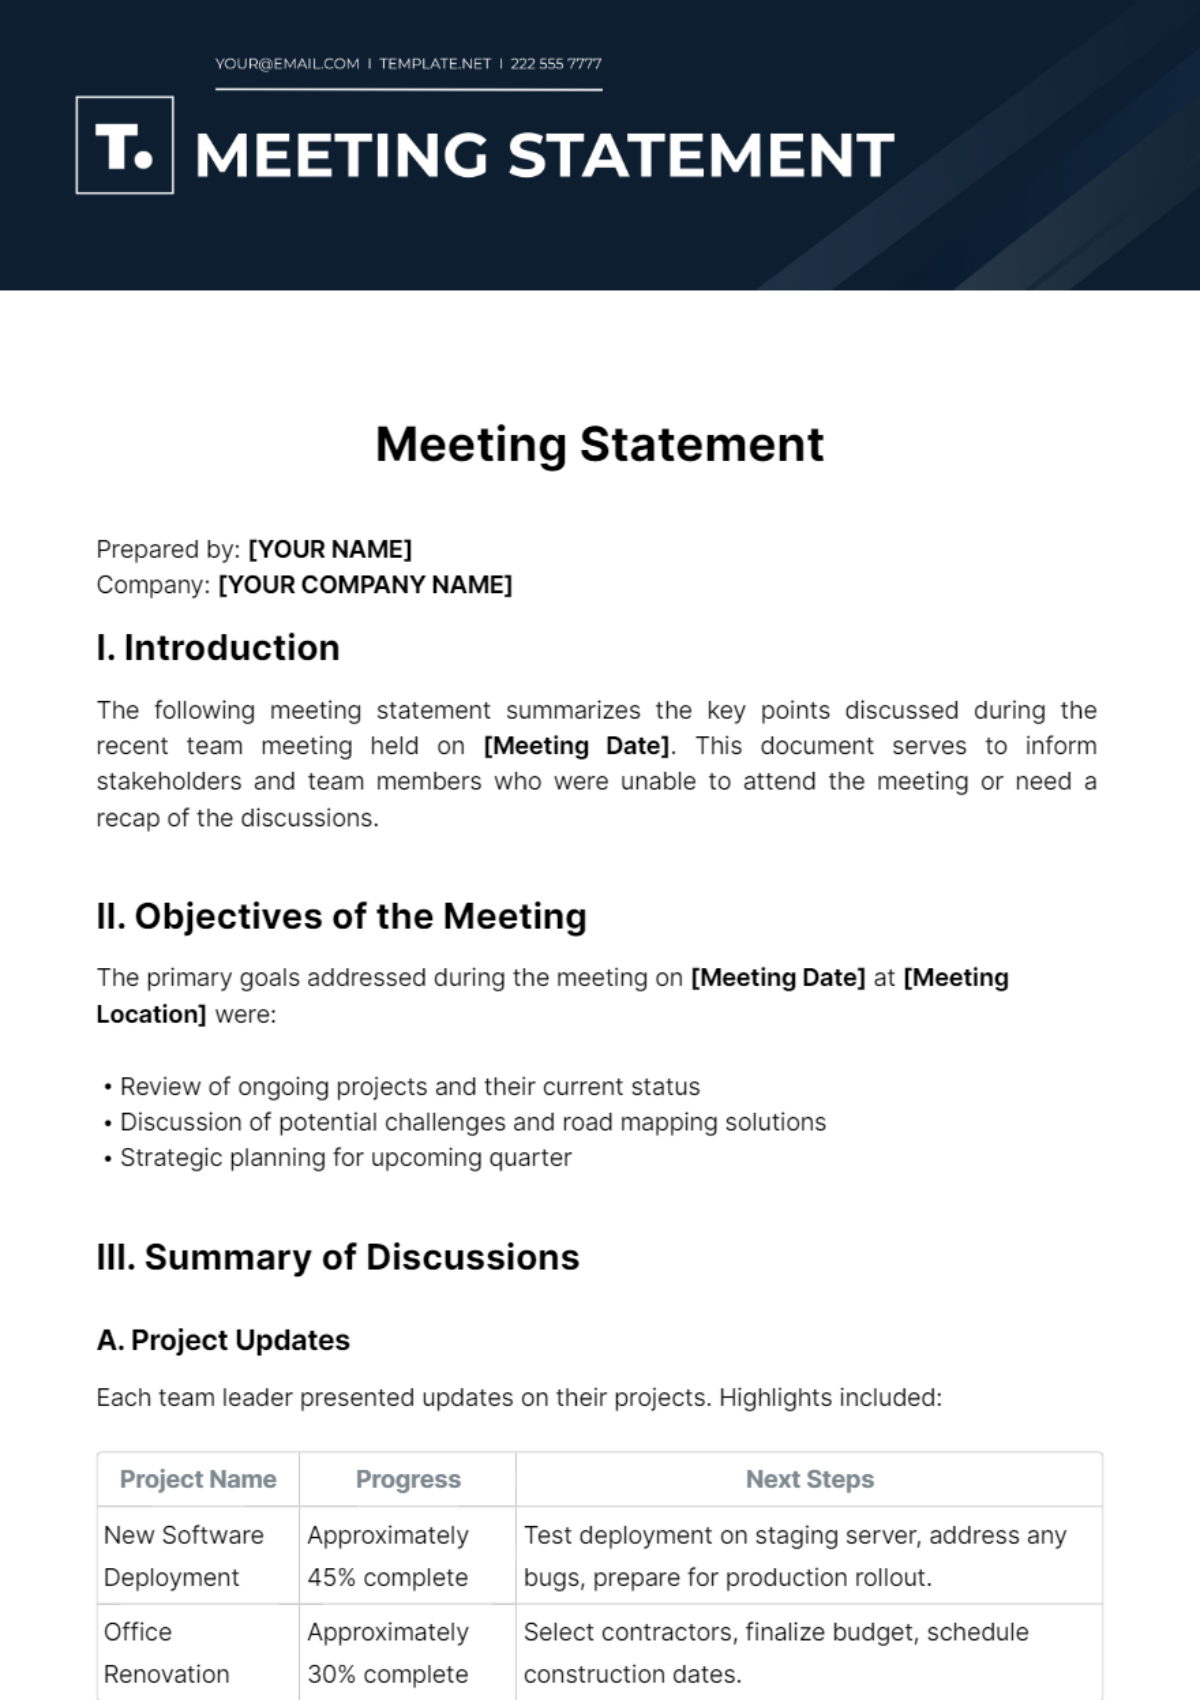 Free Meeting Statement Template